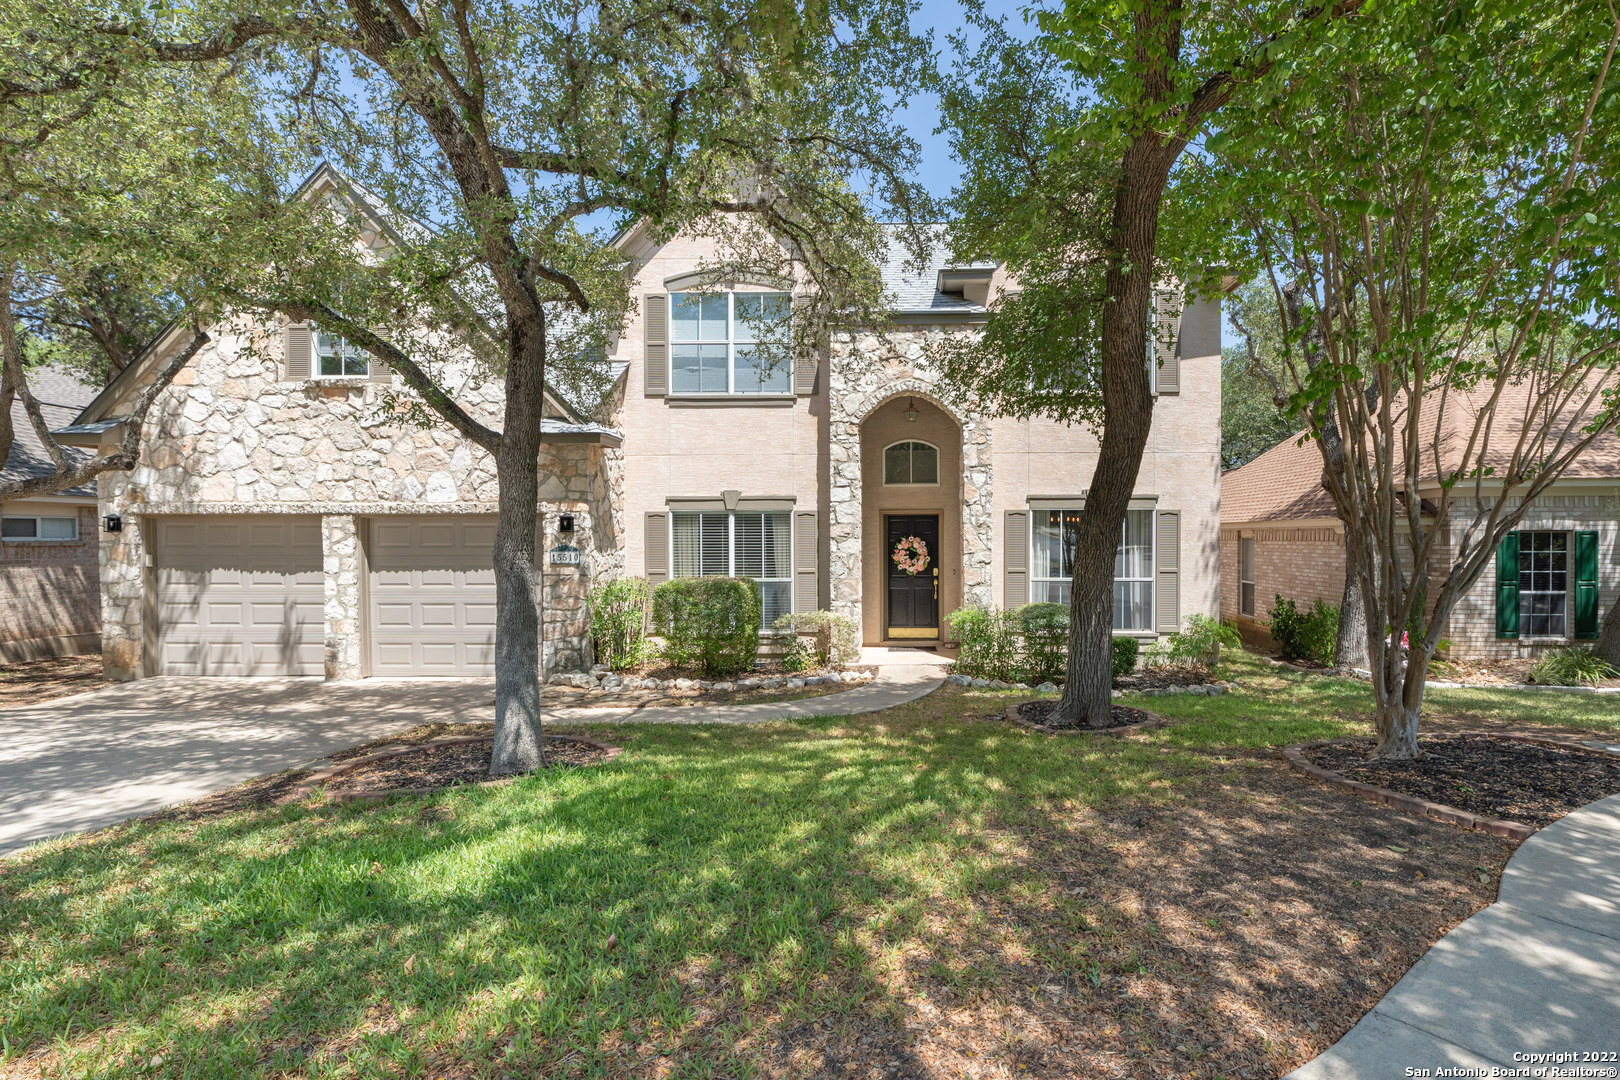 Welcome to your new custom 3 bedroom and 2.5-bath home in this prestigious gated Deerfield neighborhood. Great NEISD schools. Minutes from 281, 1604, and shopping. This home is on a scenic greenbelt. The main level features an open floor plan with tile and wood floors throughout and large windows for natural light. There are two living spaces on this level, with the family room featuring a fireplace and outside access to the quiet, wooded backyard. The gourmet kitchen has beautiful granite countertops, stainless steel appliances, plenty of oak cabinet space, and built-in microwave, oven, and cooktop. The large master suite and master bath are downstairs, with dual vanities, a separate garden tub and shower, and two walk-in closets. The second level has two additional bedrooms, a bath with double vanity and shower tub, and a large game room with beautiful wood floors. Your backyard with a large deck and mature oak trees is ideal for entertaining and relaxation. Do not miss out on this remarkable home.